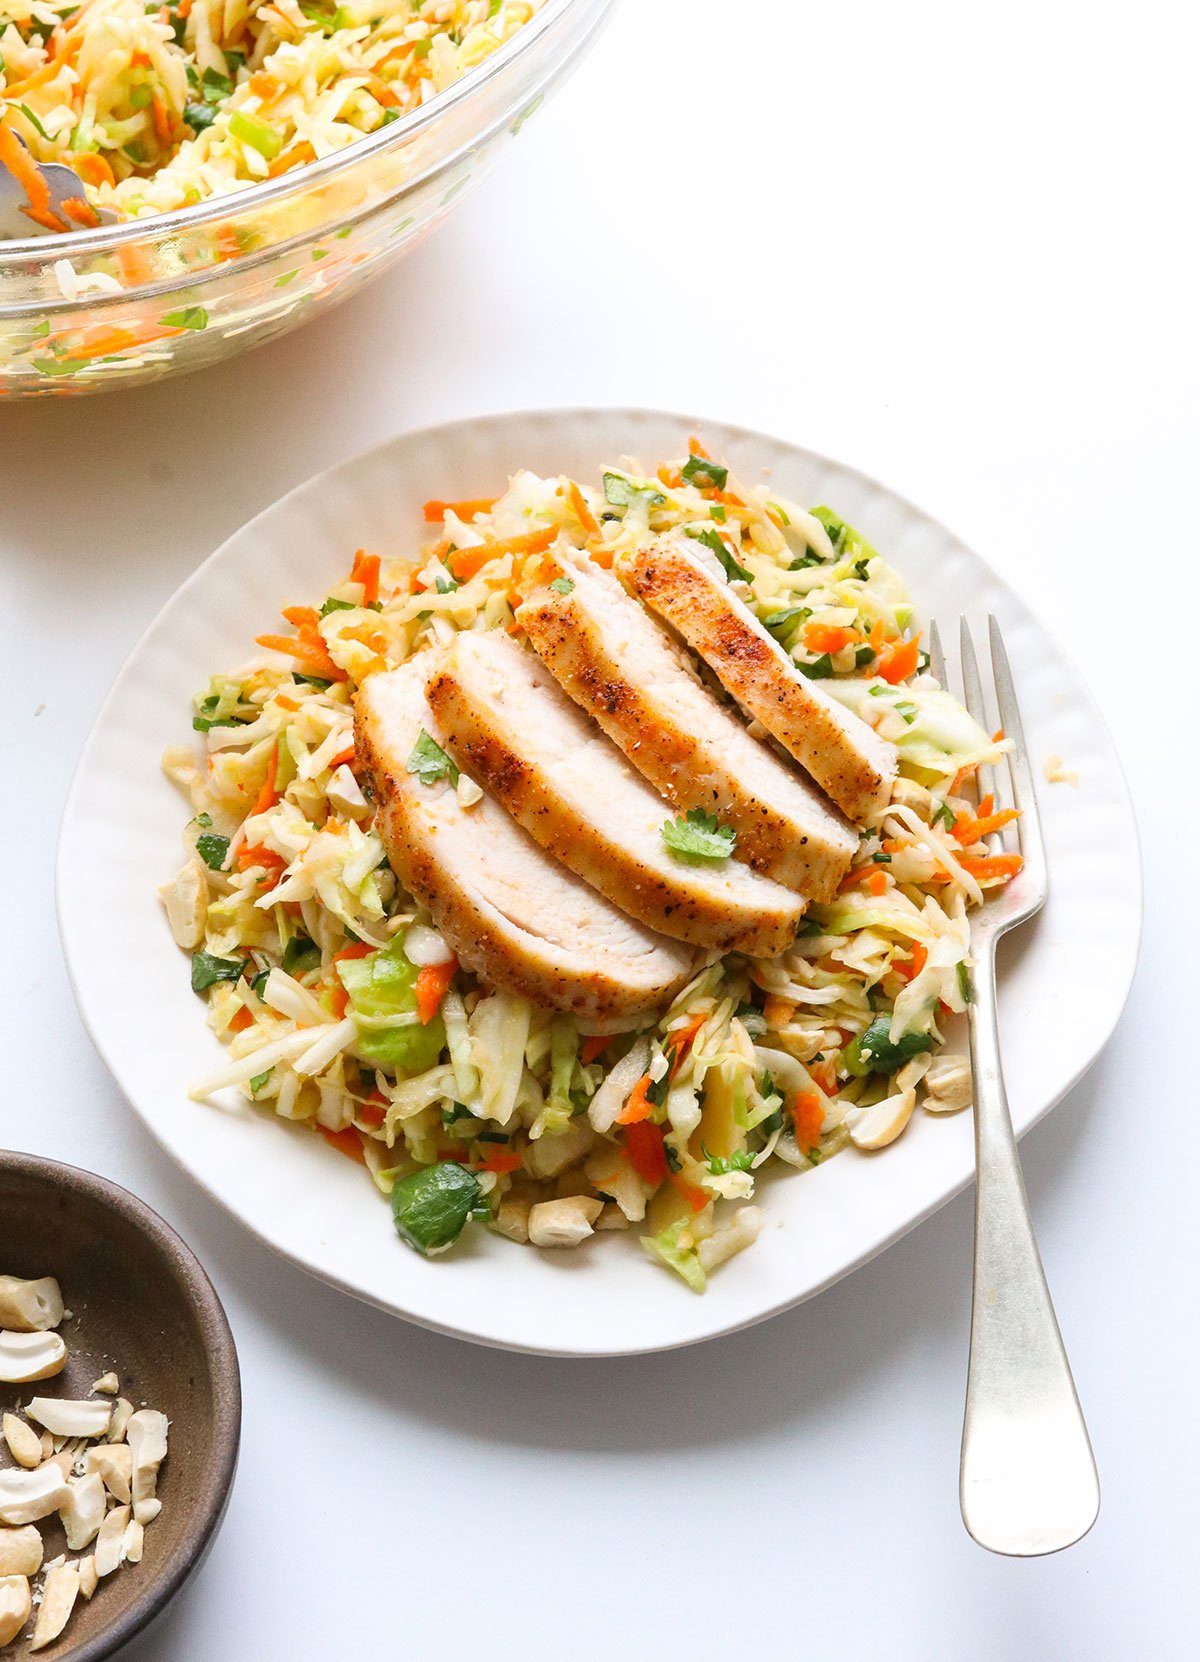 cabbage salad served with chicken on top.